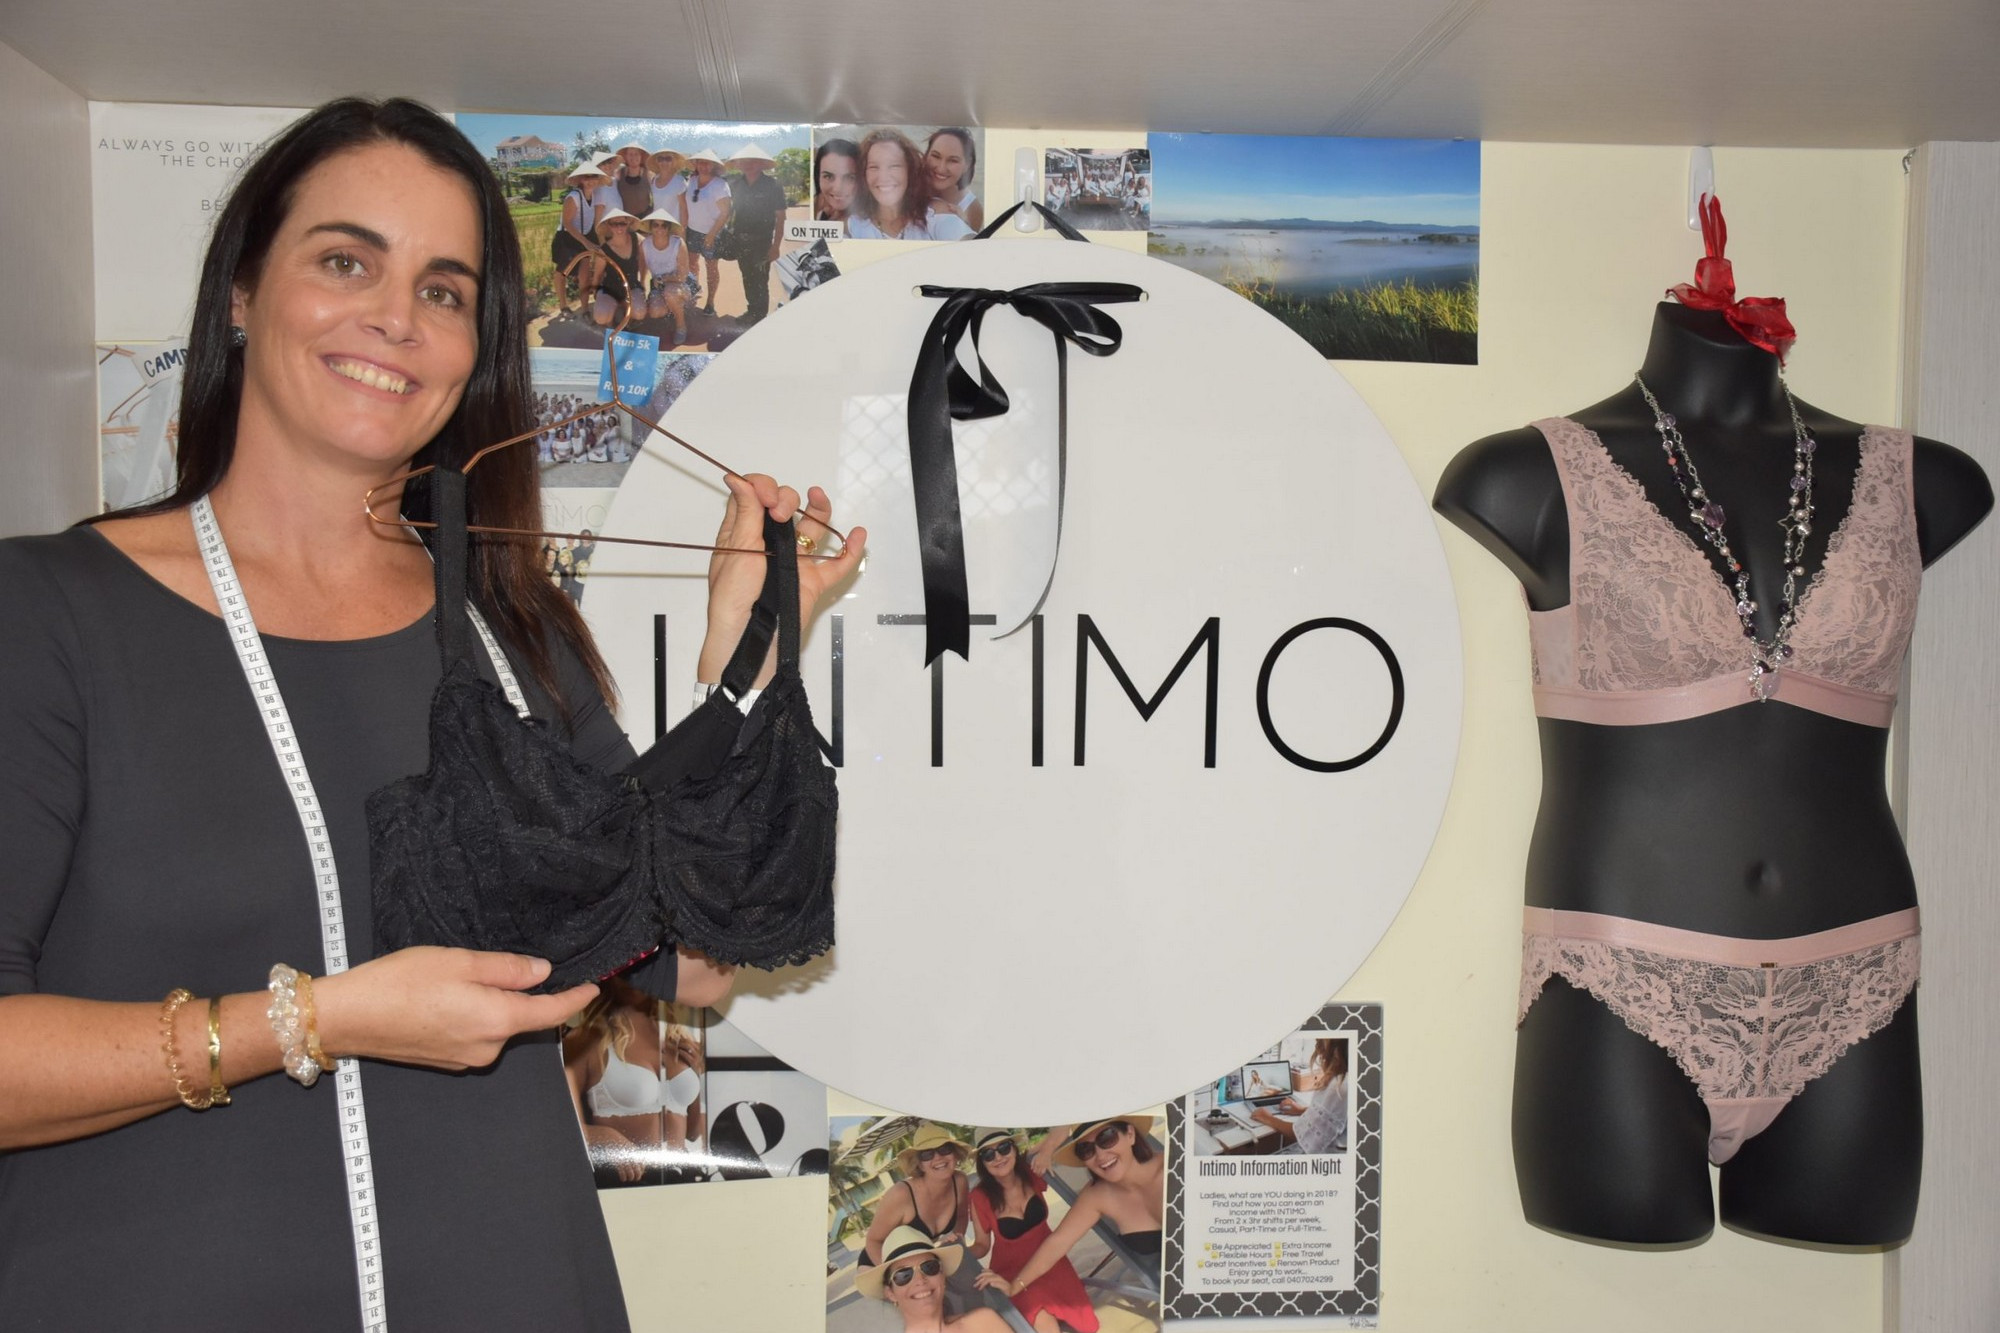 Virtual bra fittings from local business - feature photo